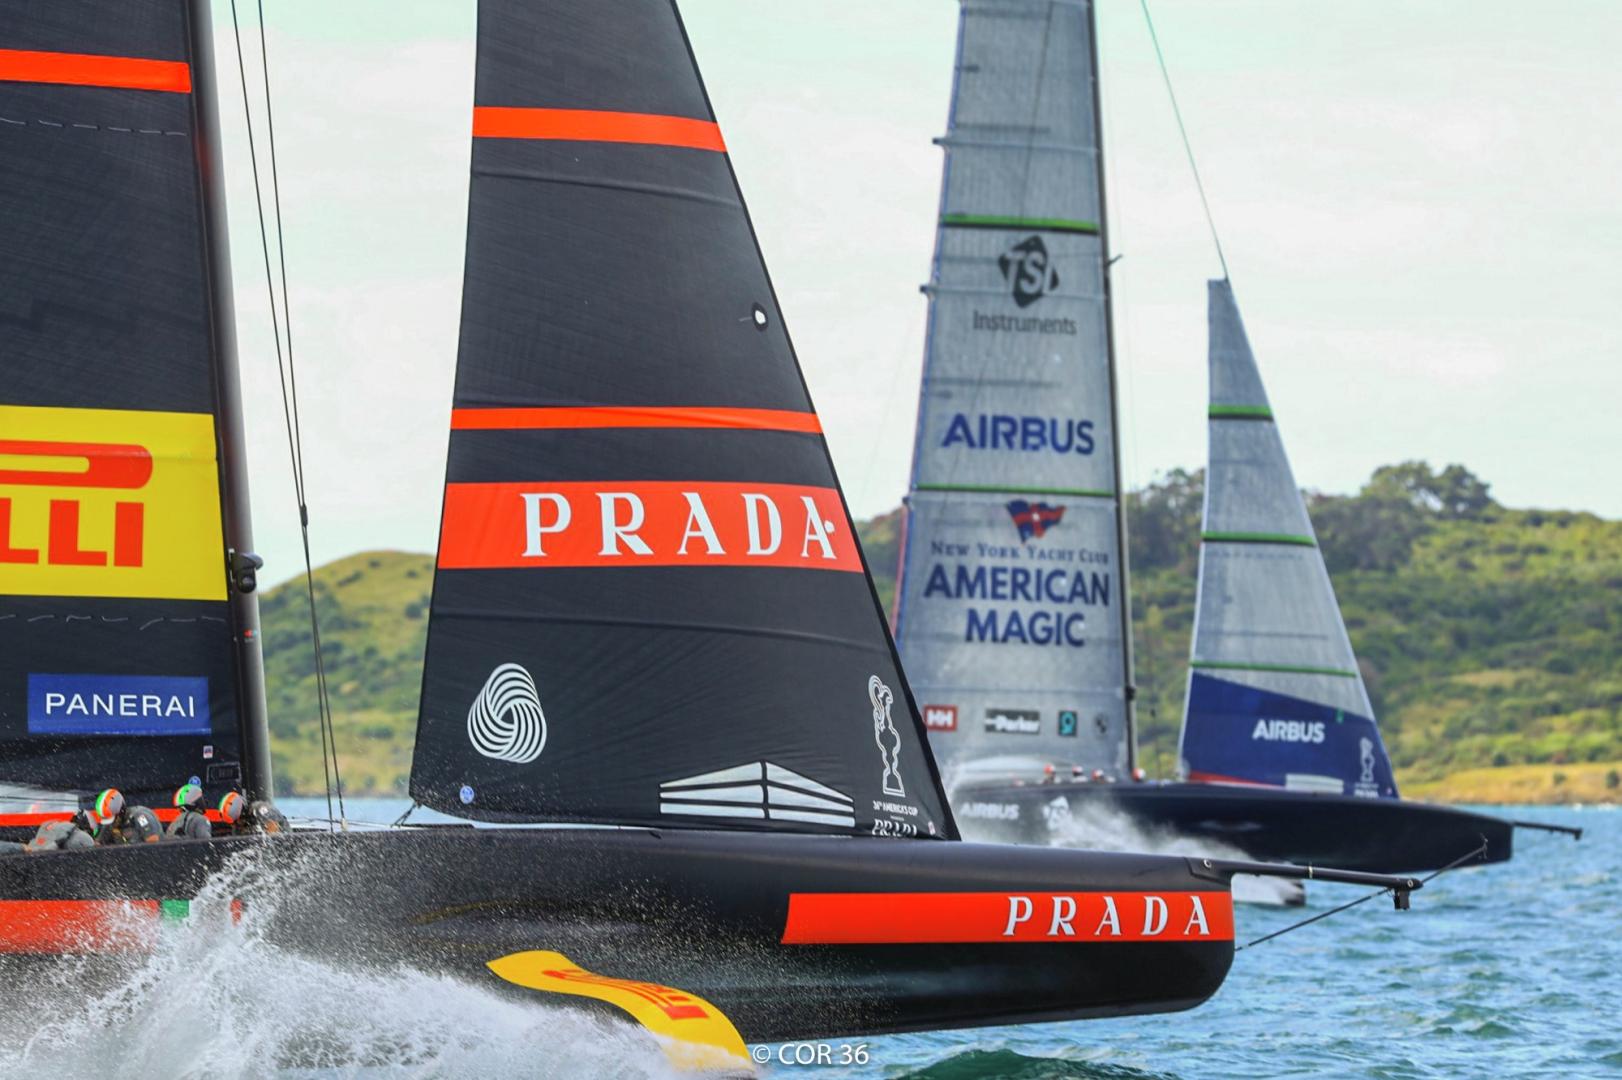 36th America’s Cup had its first successful test run